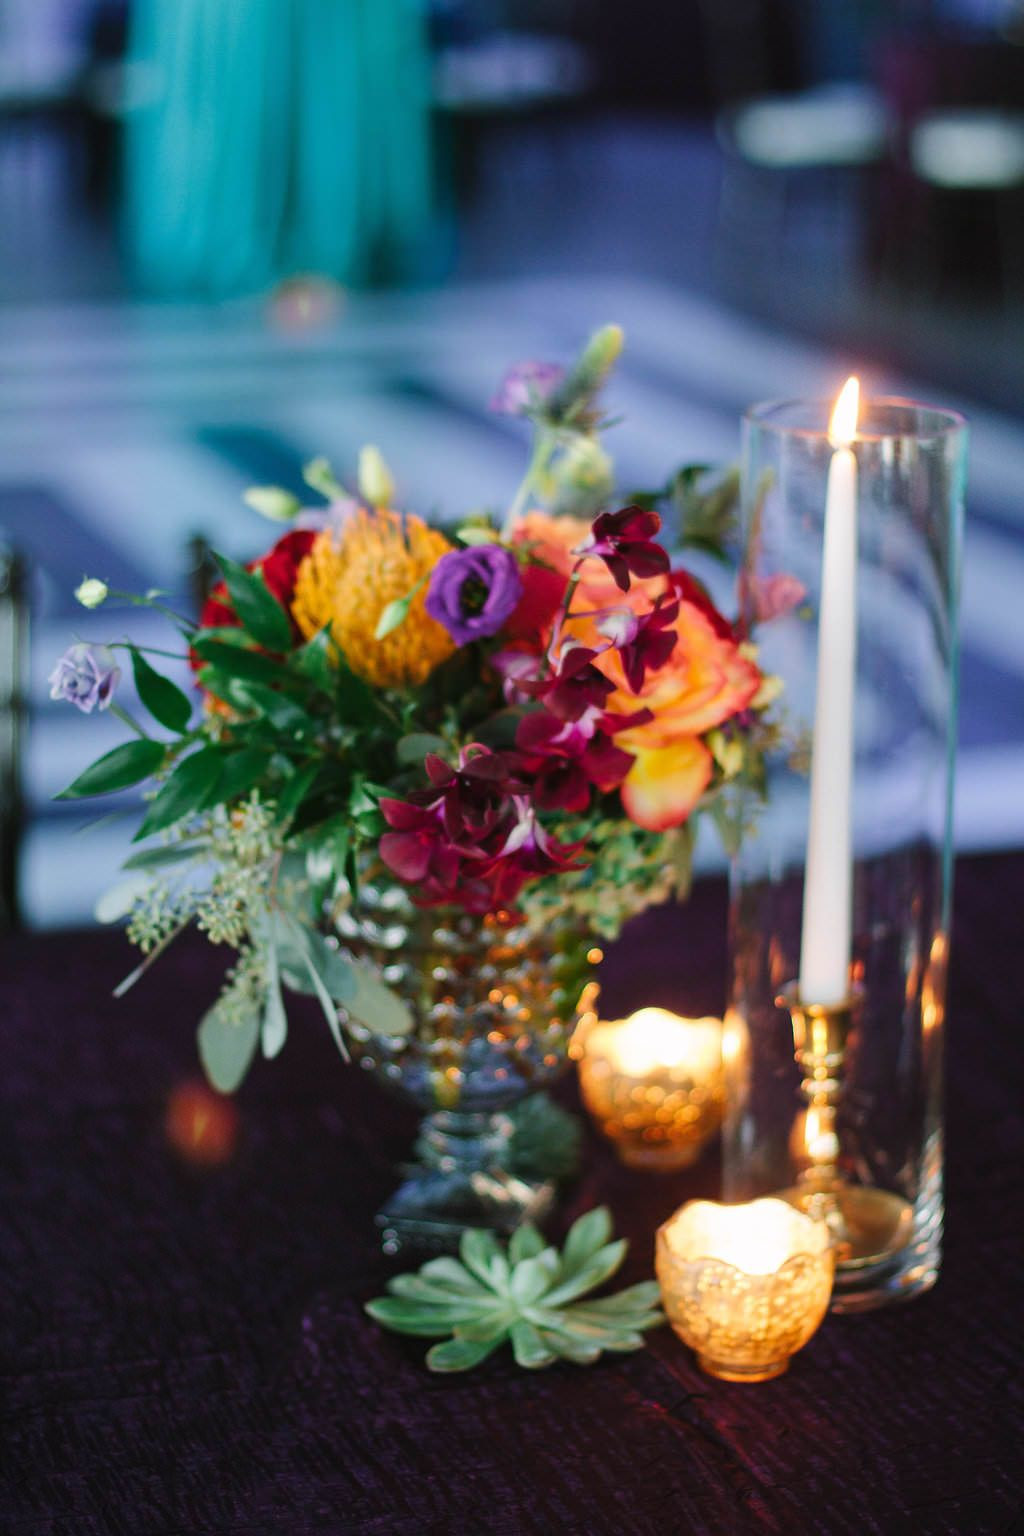 29 Lovely Glass Vases for Wedding Table Decorations 2022 free download glass vases for wedding table decorations of whimsical jewel toned waterfront florida wedding every girl has pertaining to whimsical jewel tone wedding reception table decor with small dark 